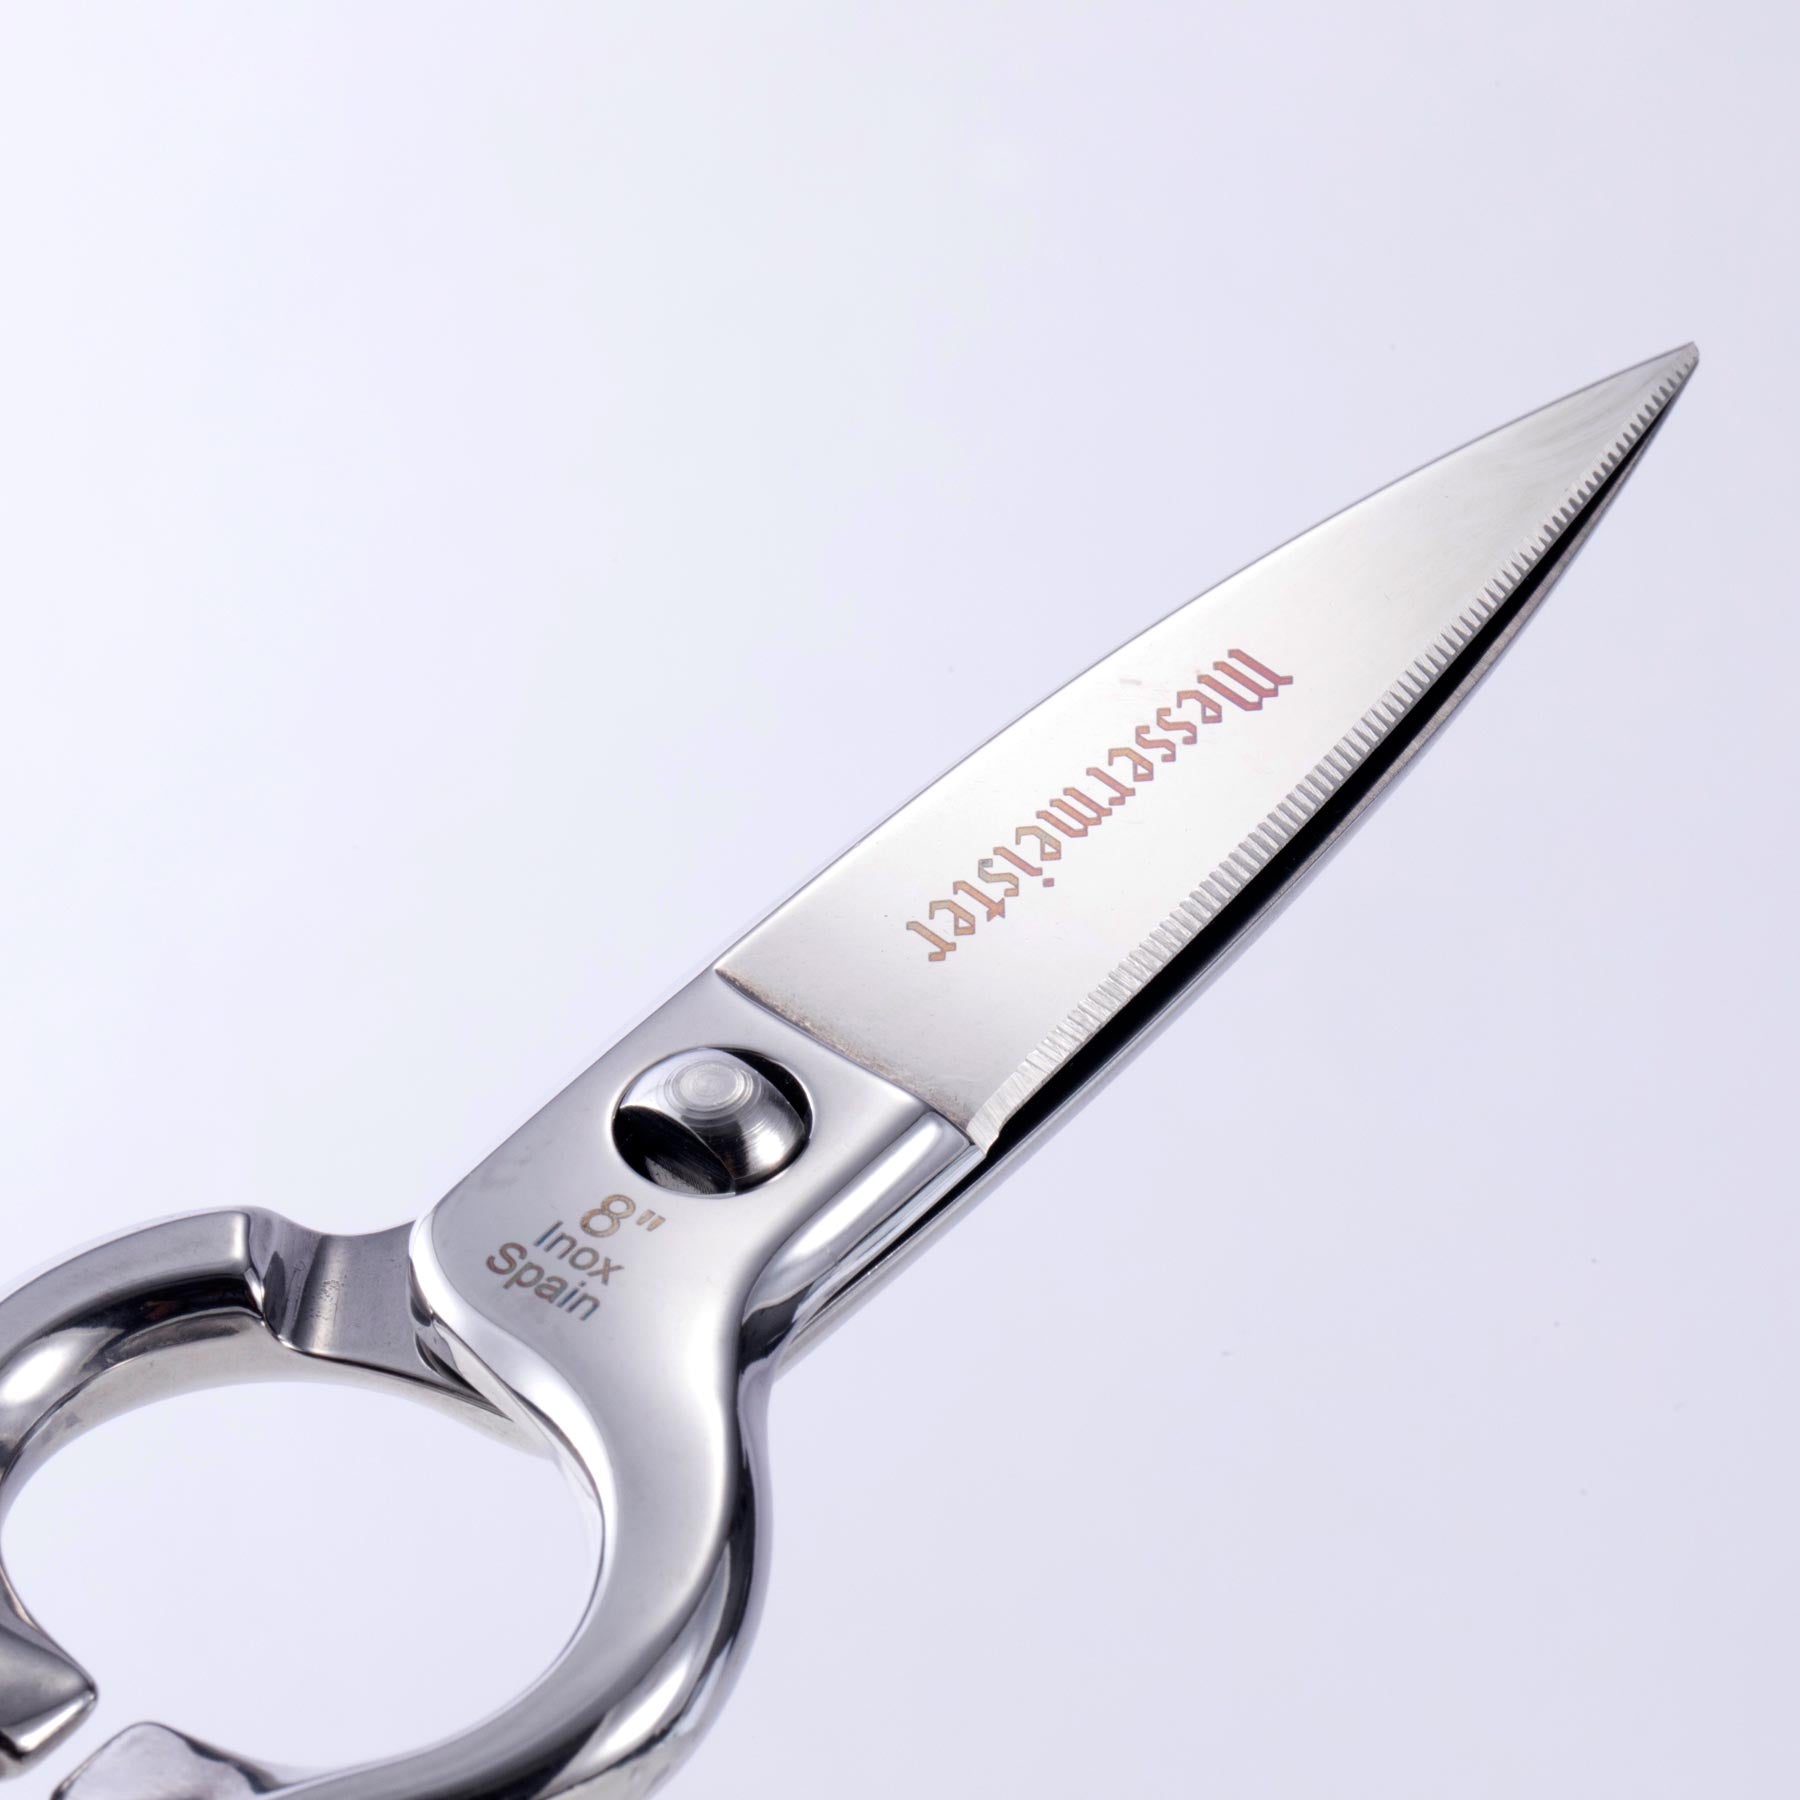 CANARY Stainless Steel Take-Apart Kitchen Scissors